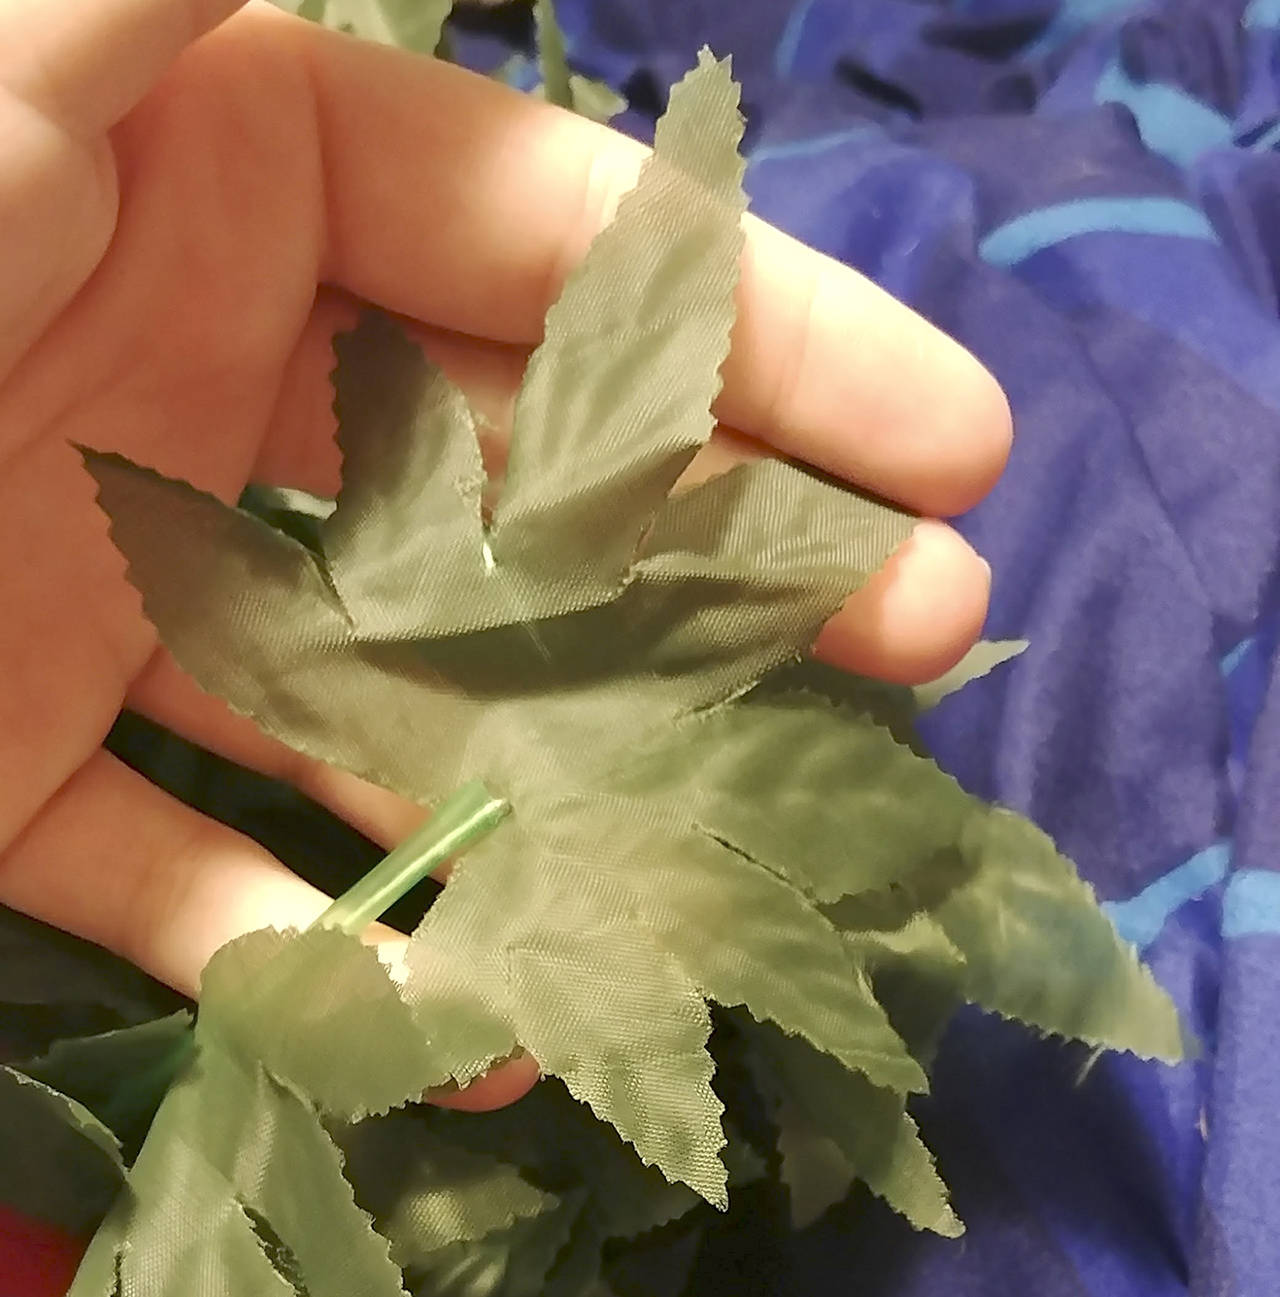 Leis bearing a striking resemblance to marijuana leaves were handed out at Marysville Pilchuck High School. (Courtesy photo)